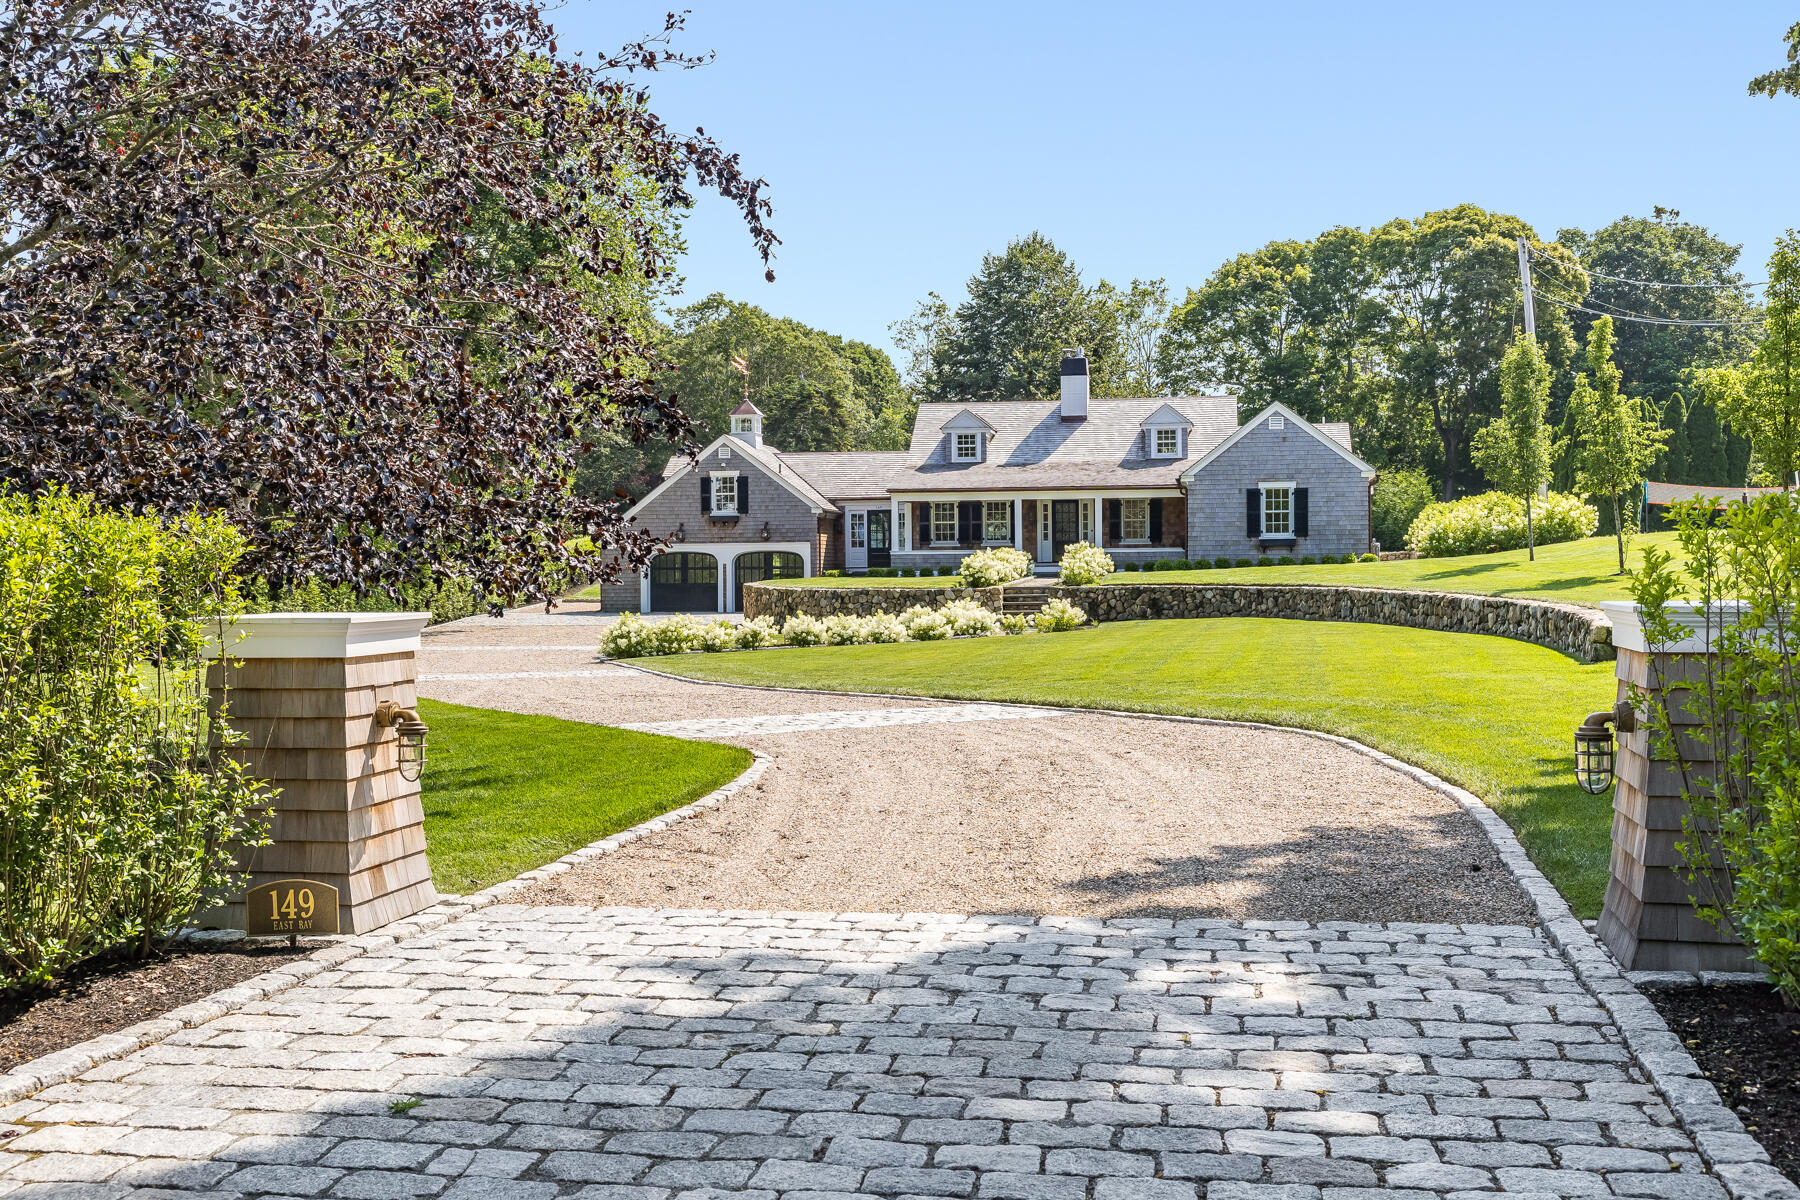 149 East Bay Road, Osterville, Massachusetts 02655, 4 Bedrooms Bedrooms, 8 Rooms Rooms,3 BathroomsBathrooms,Residential,For Sale,149 East Bay Road,22401542